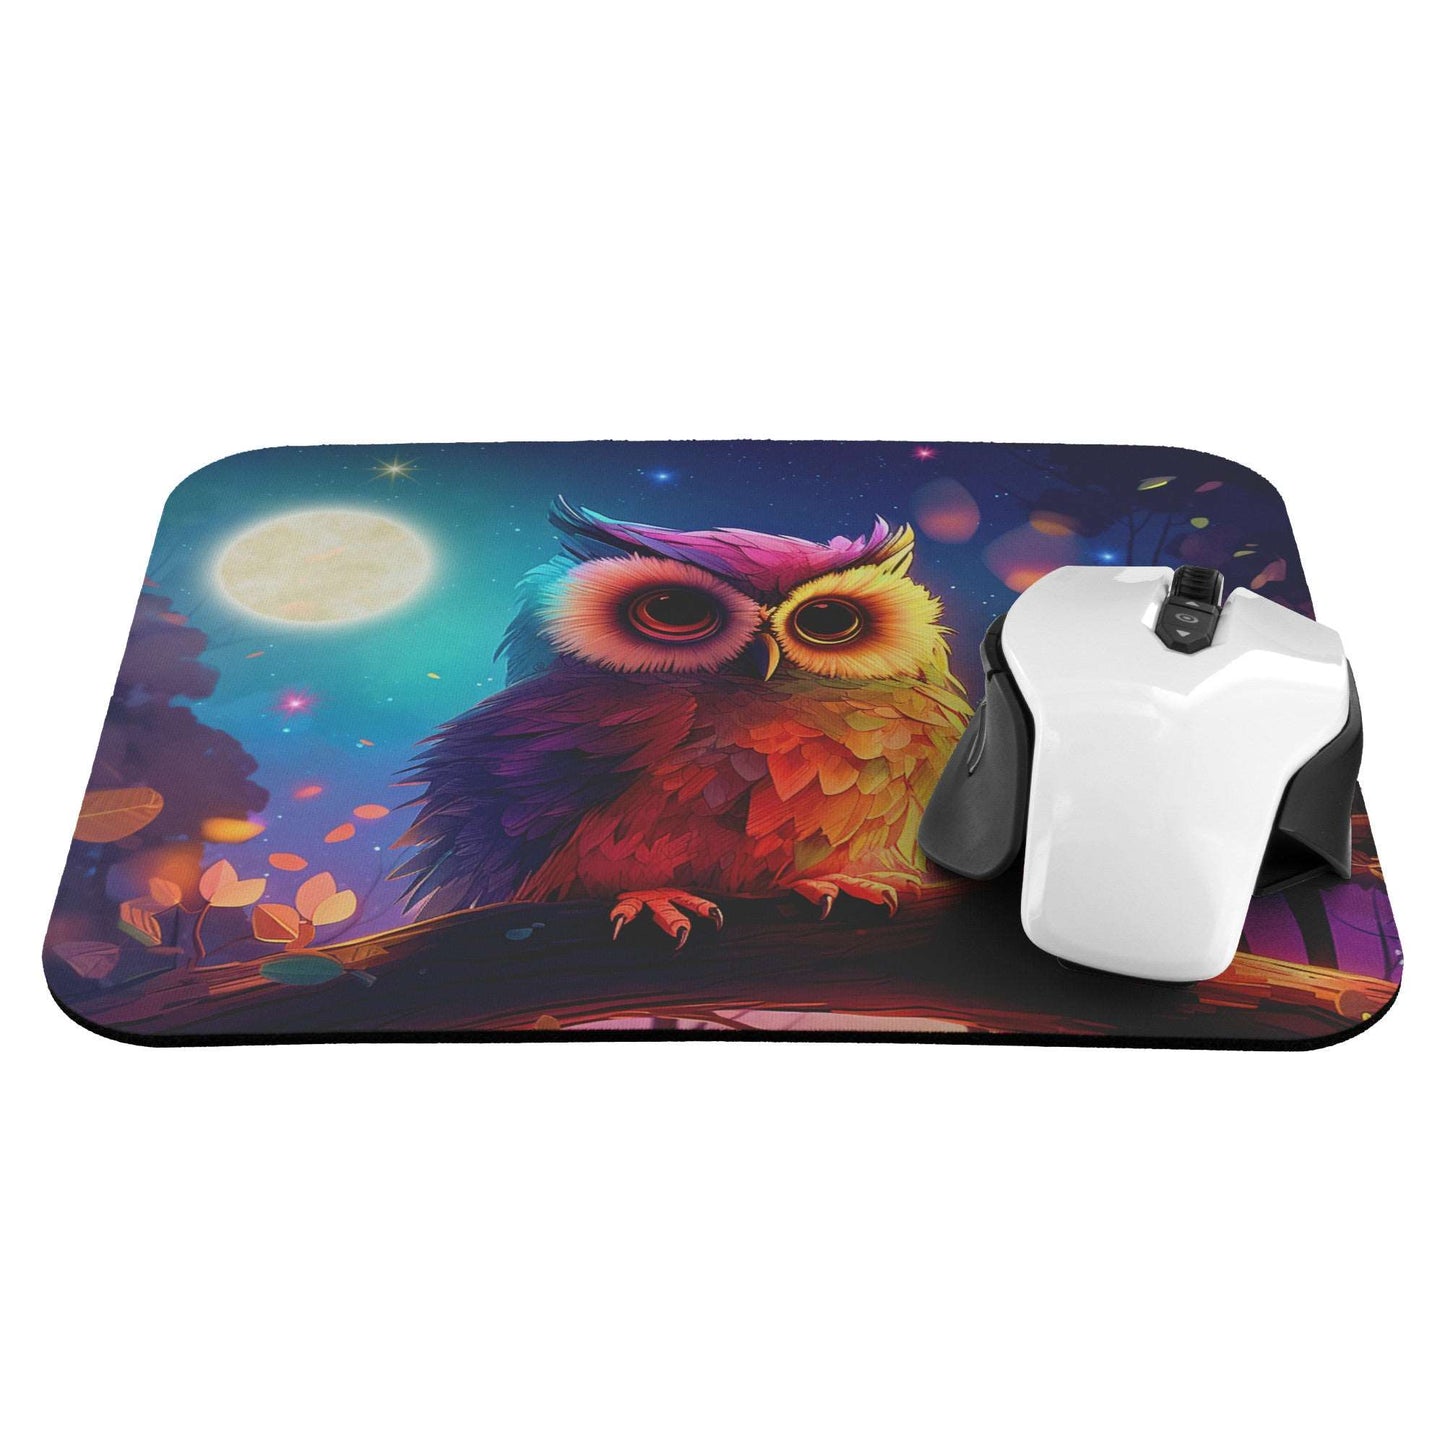 Mouse Pad - The Owl Who Stole the Moon